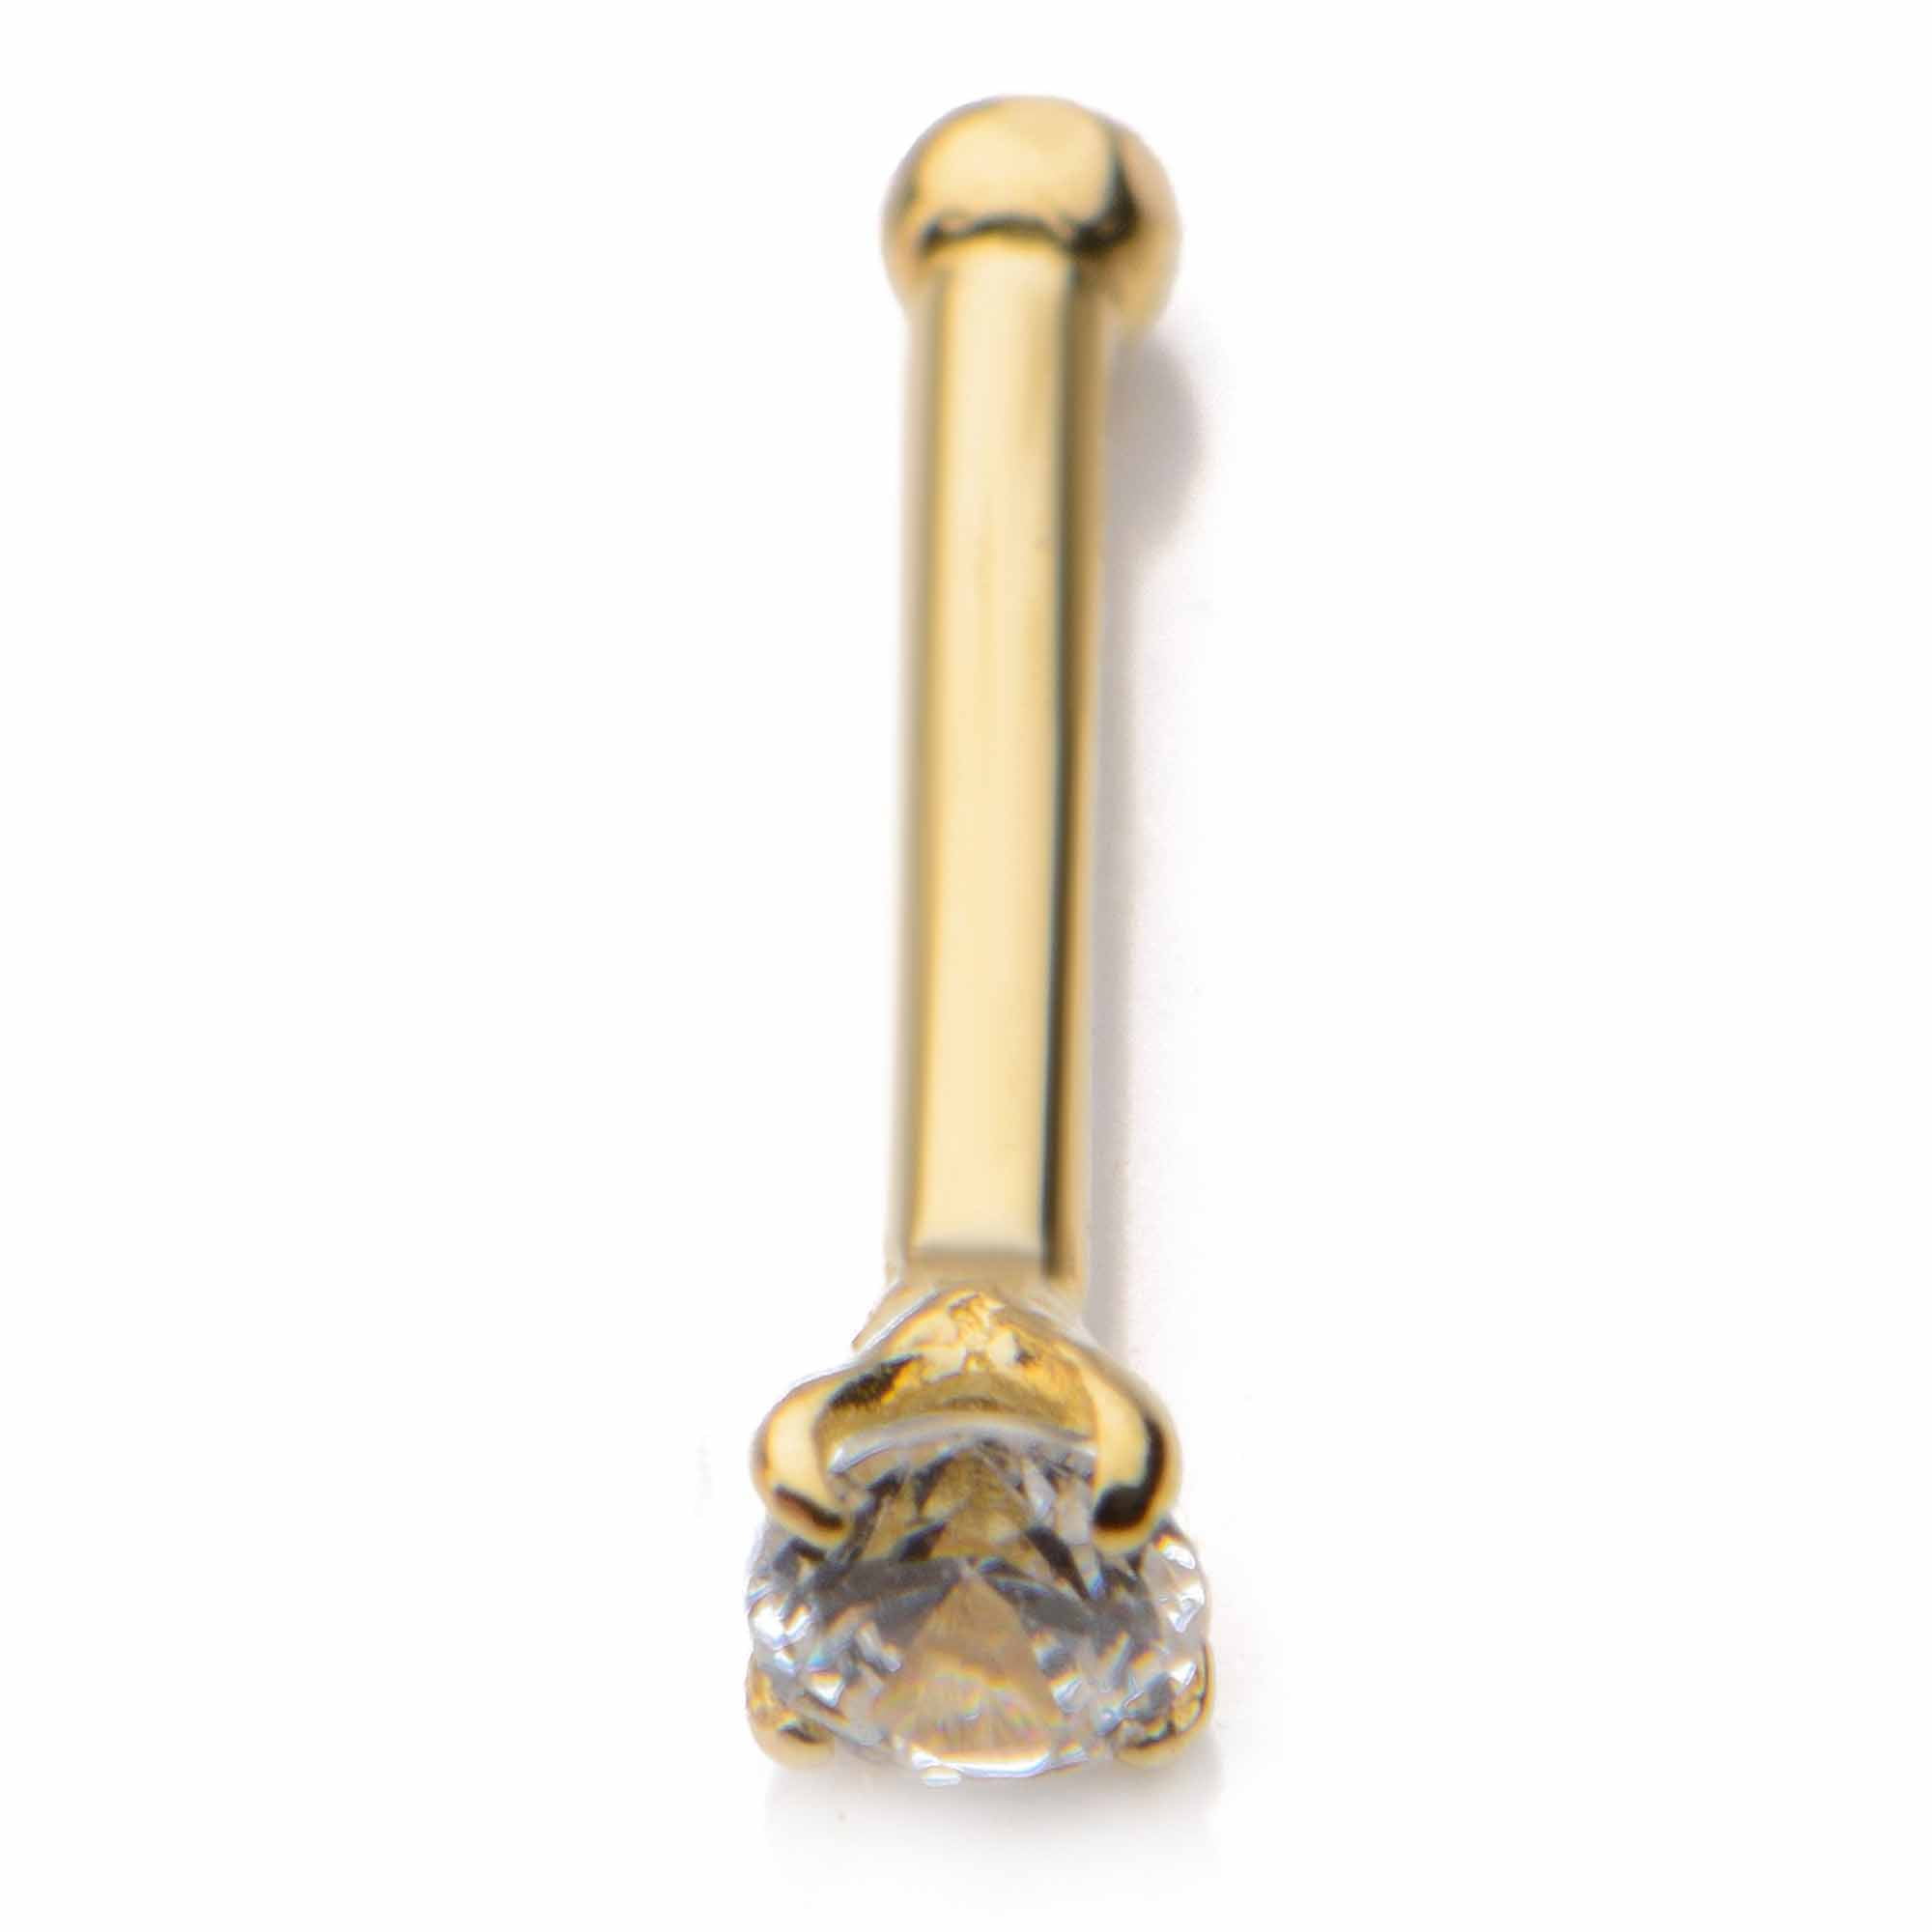 24k GOLD PLATED Nose Screw Bone Ring Jewelry CZ Prong Stud 20g GORGEOUS Piercing